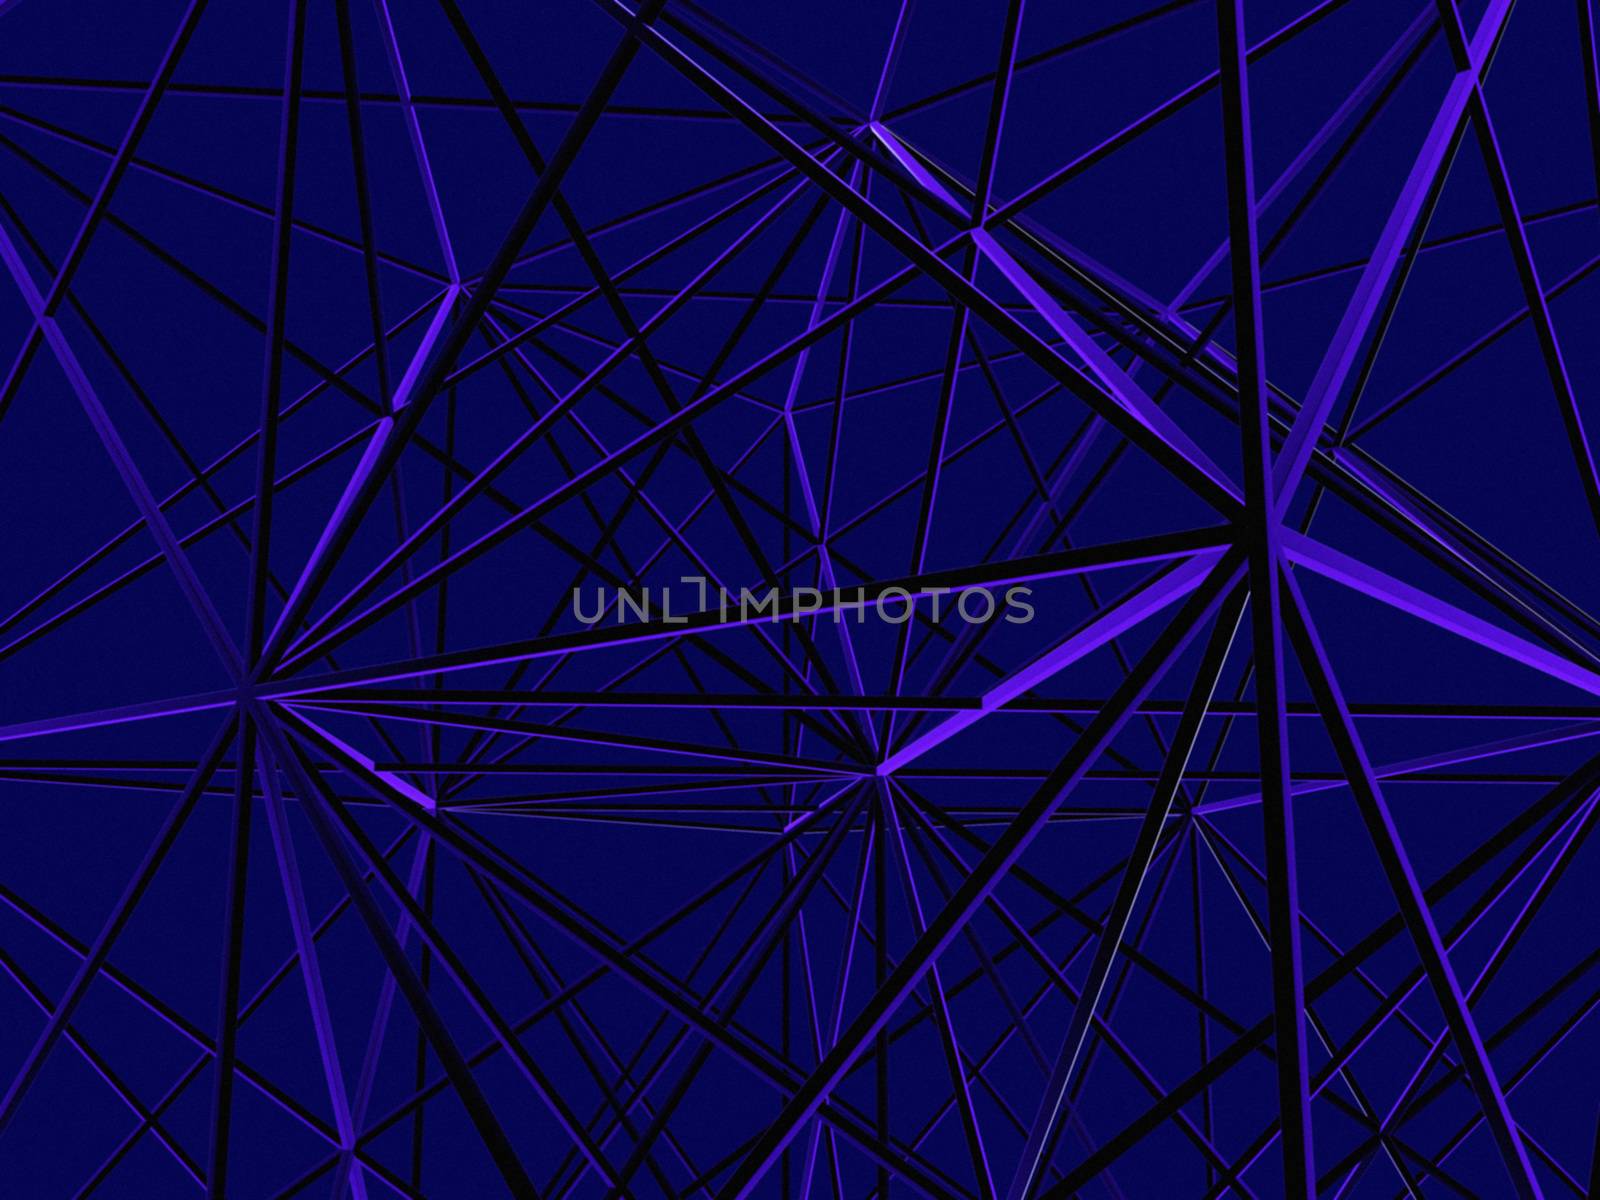 Abstract Lines Construction Background for Futuristic High Tech Design